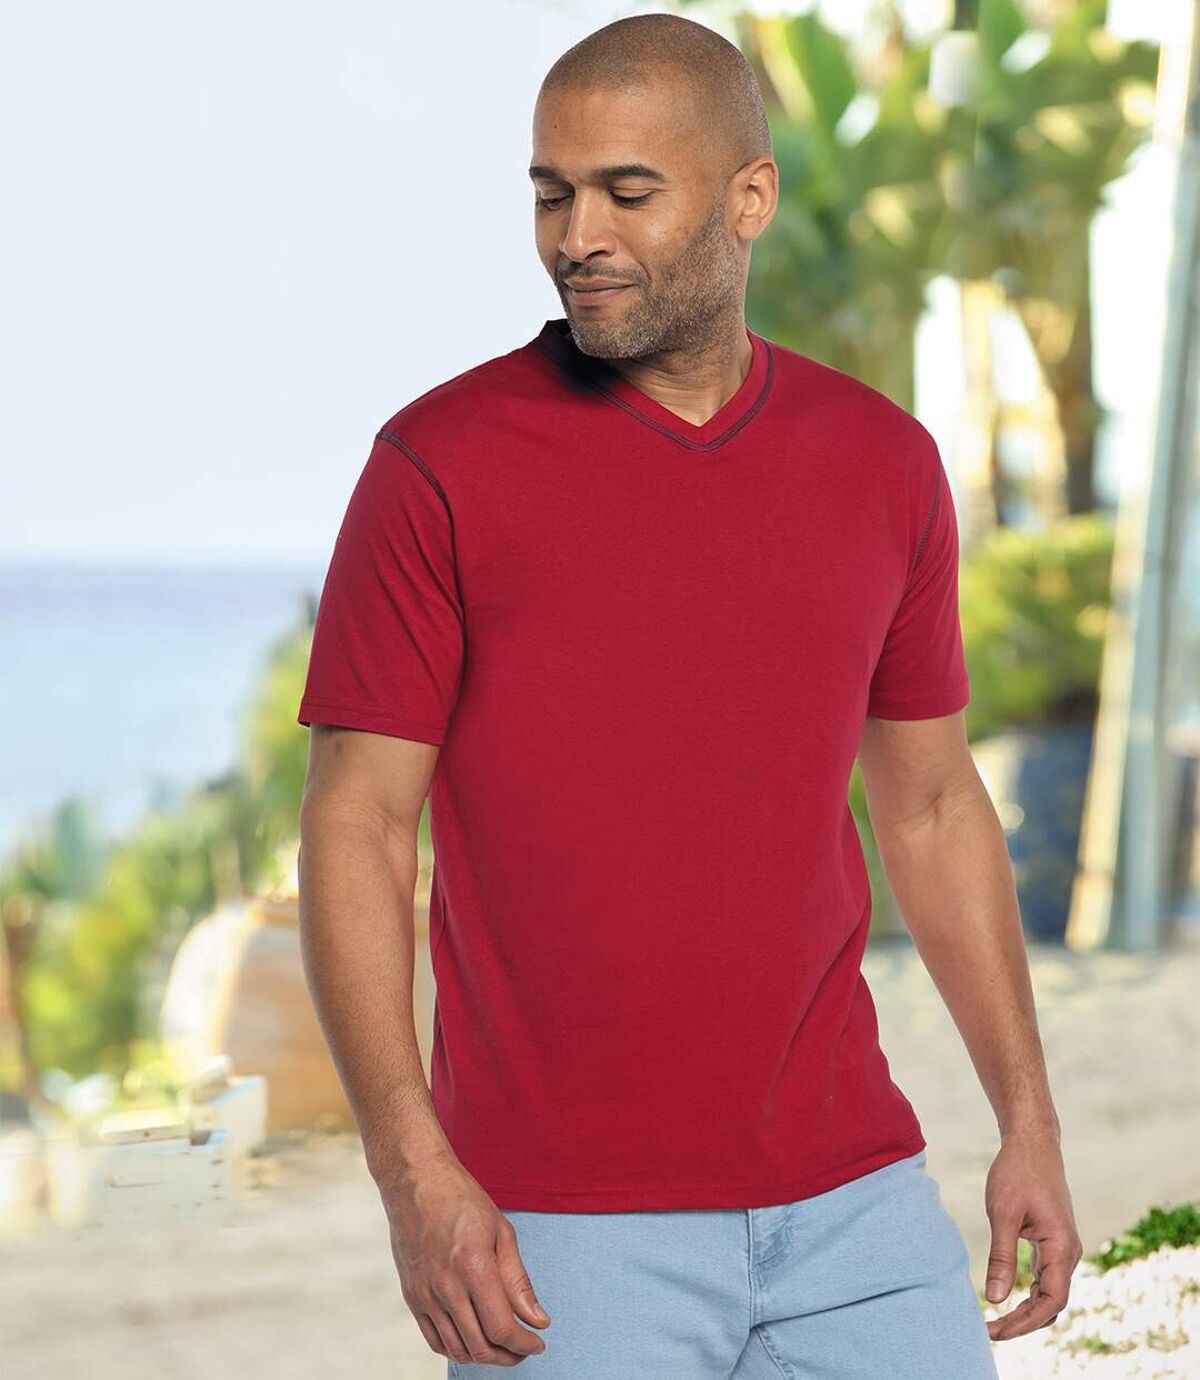 Men's Pack of 3 V-Neck T-Shirts - Gray, Charcoal and Red Atlas For Men